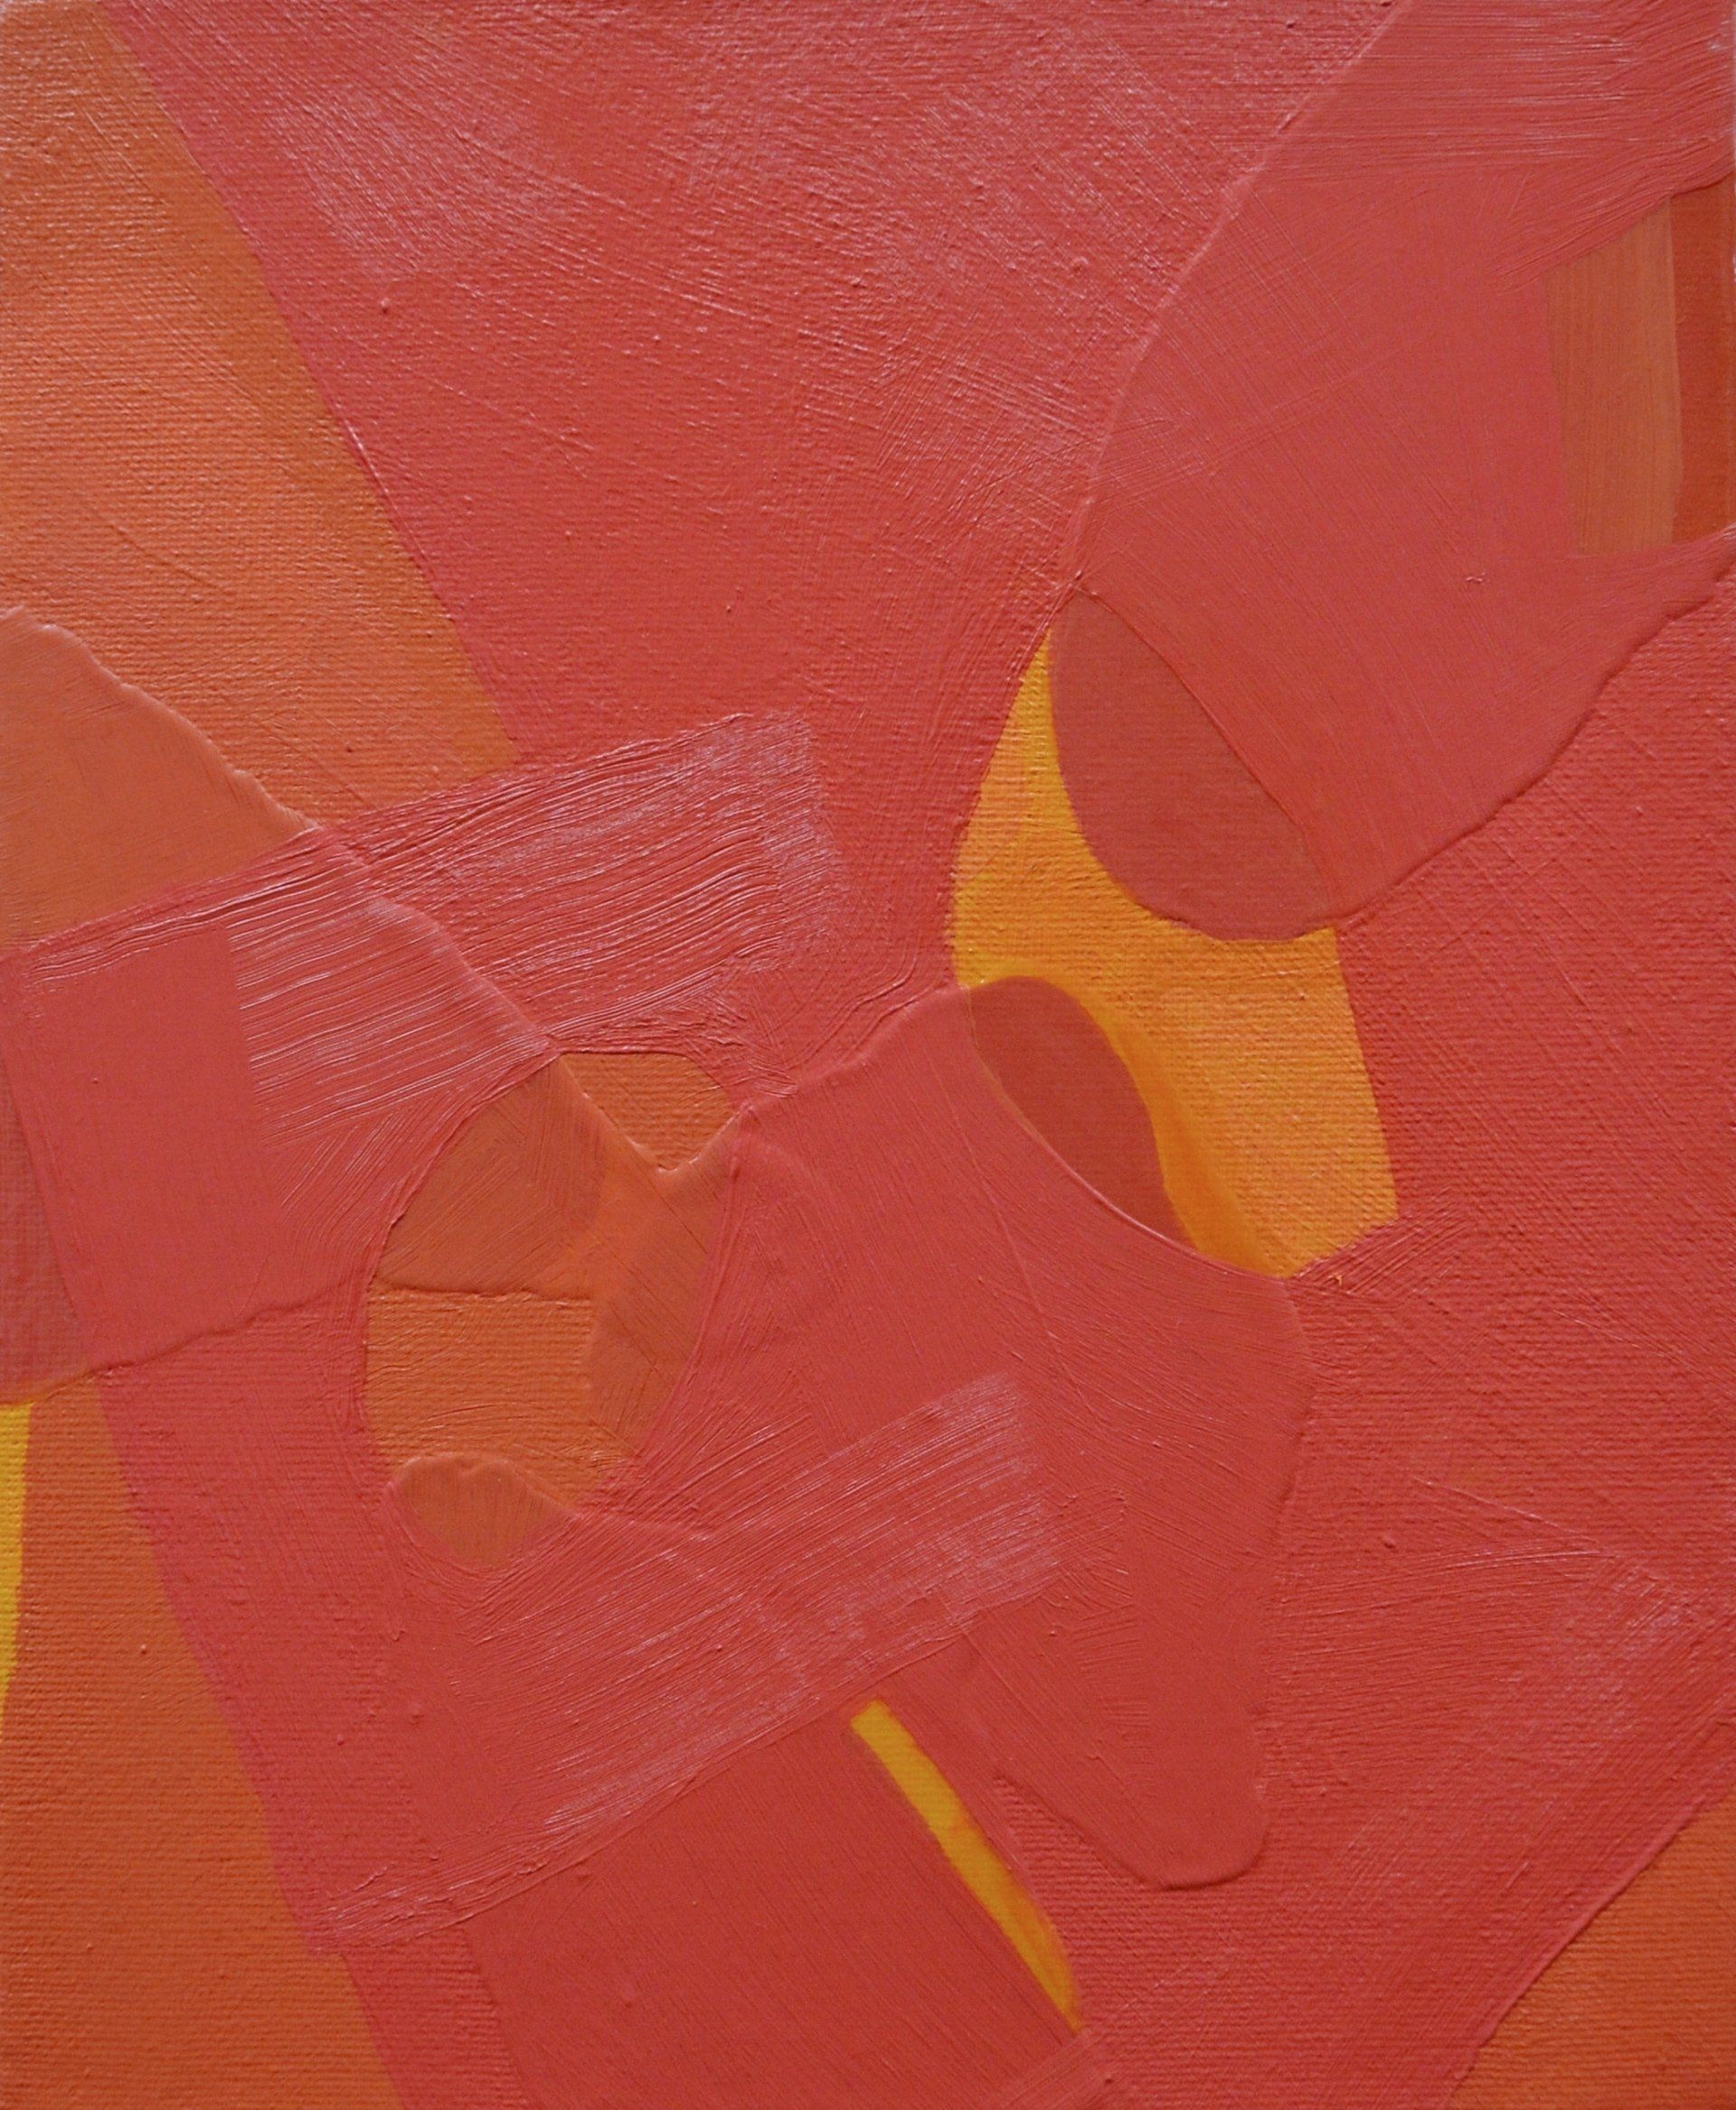 Siobhan McLaughlin’s abstract and colourful paintings in reds, pinks and oranges